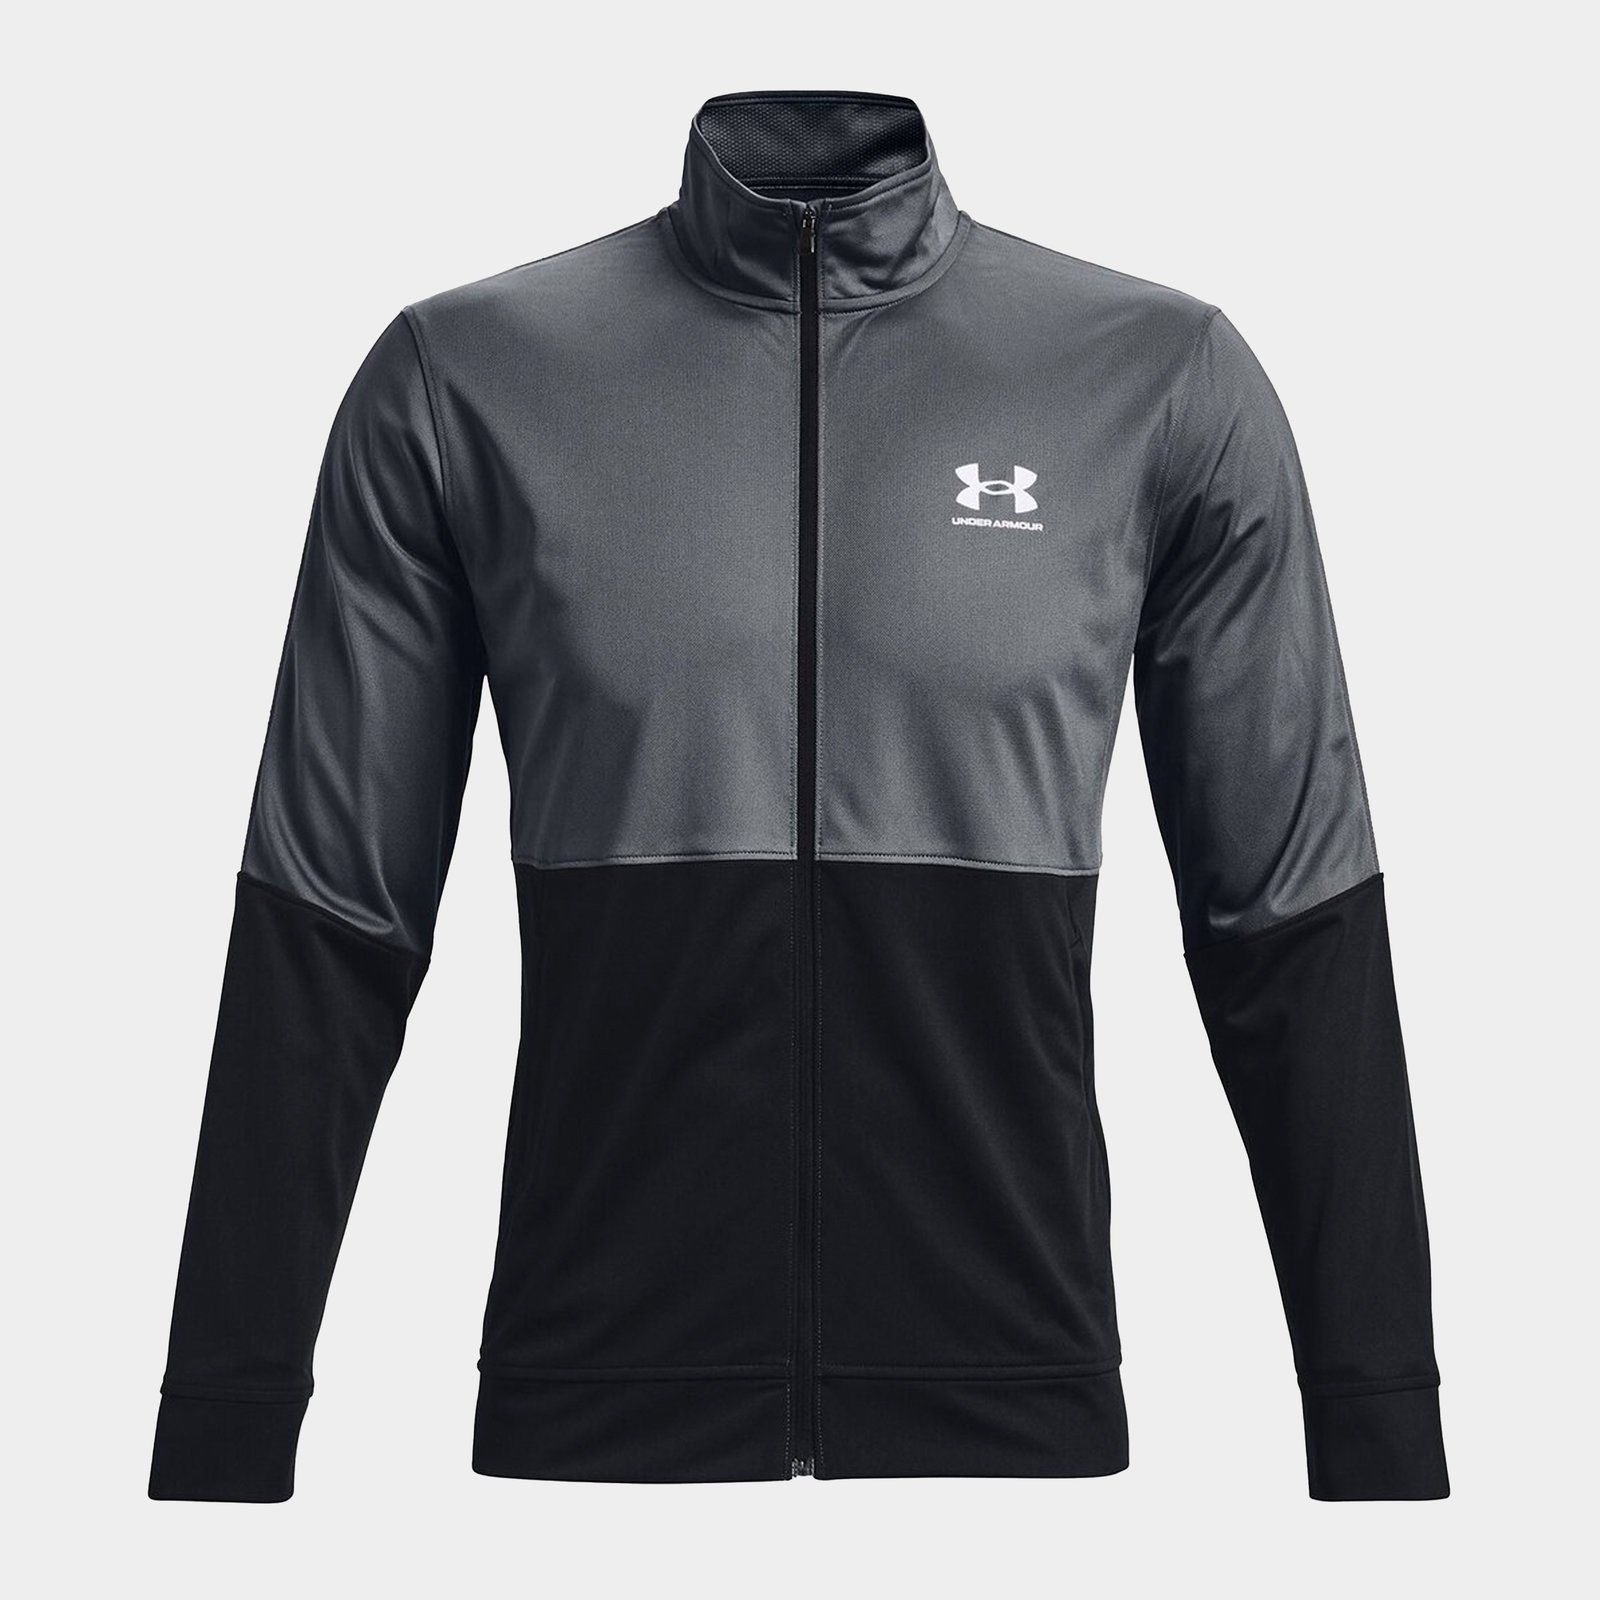 Under Armour Challenger Youth Track Jacket